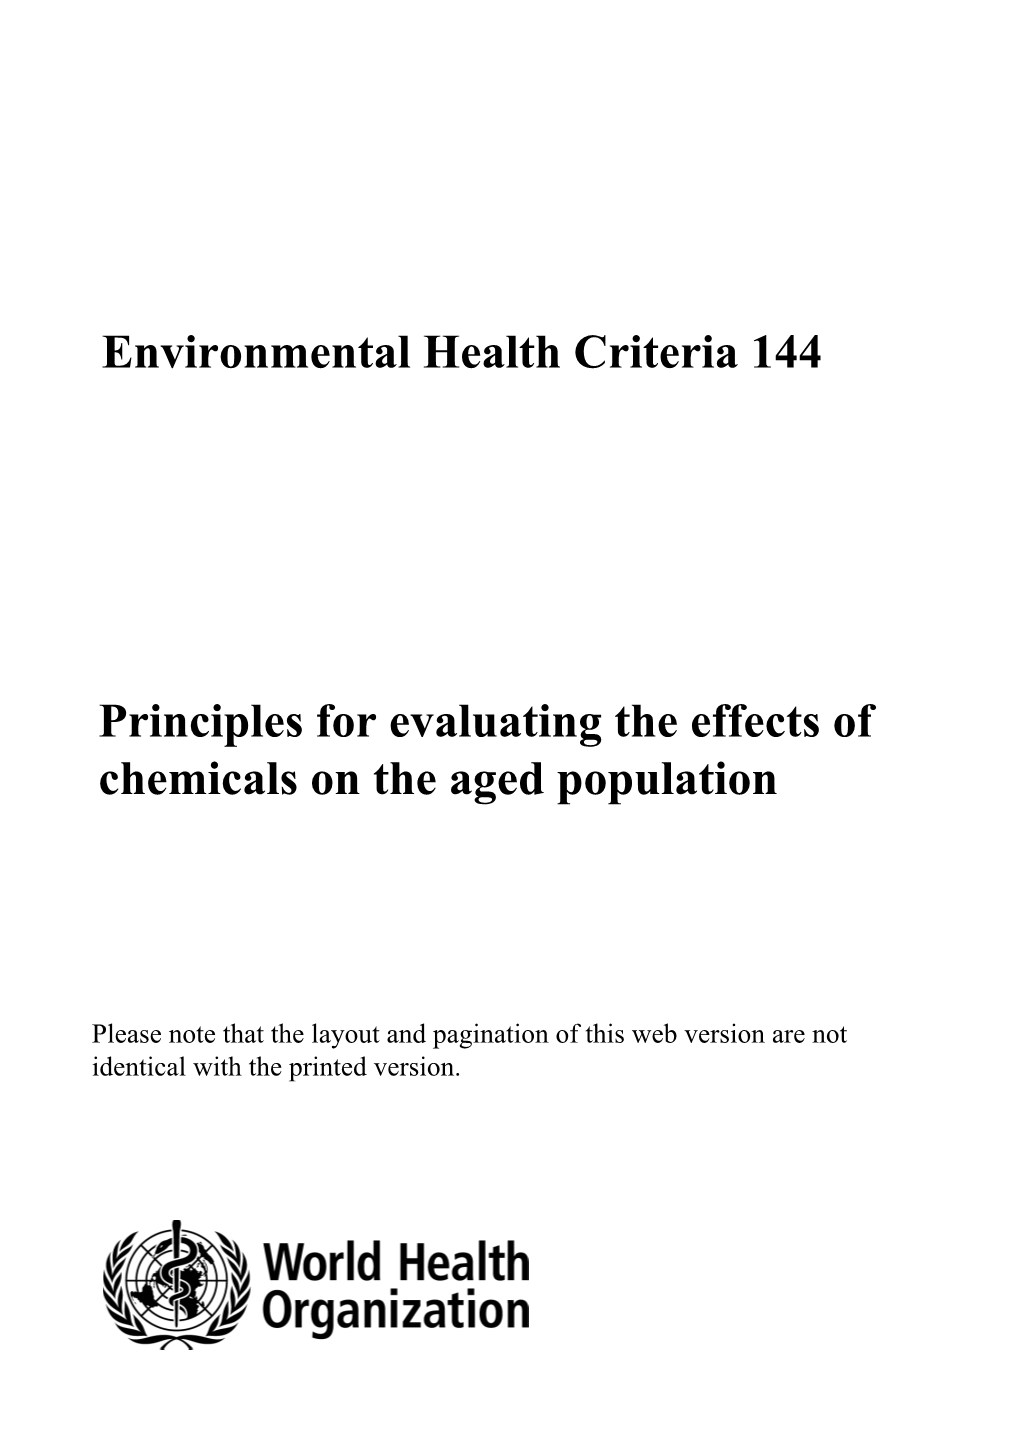 Environmental Health Criteria 144 Principles for Evaluating the Effects